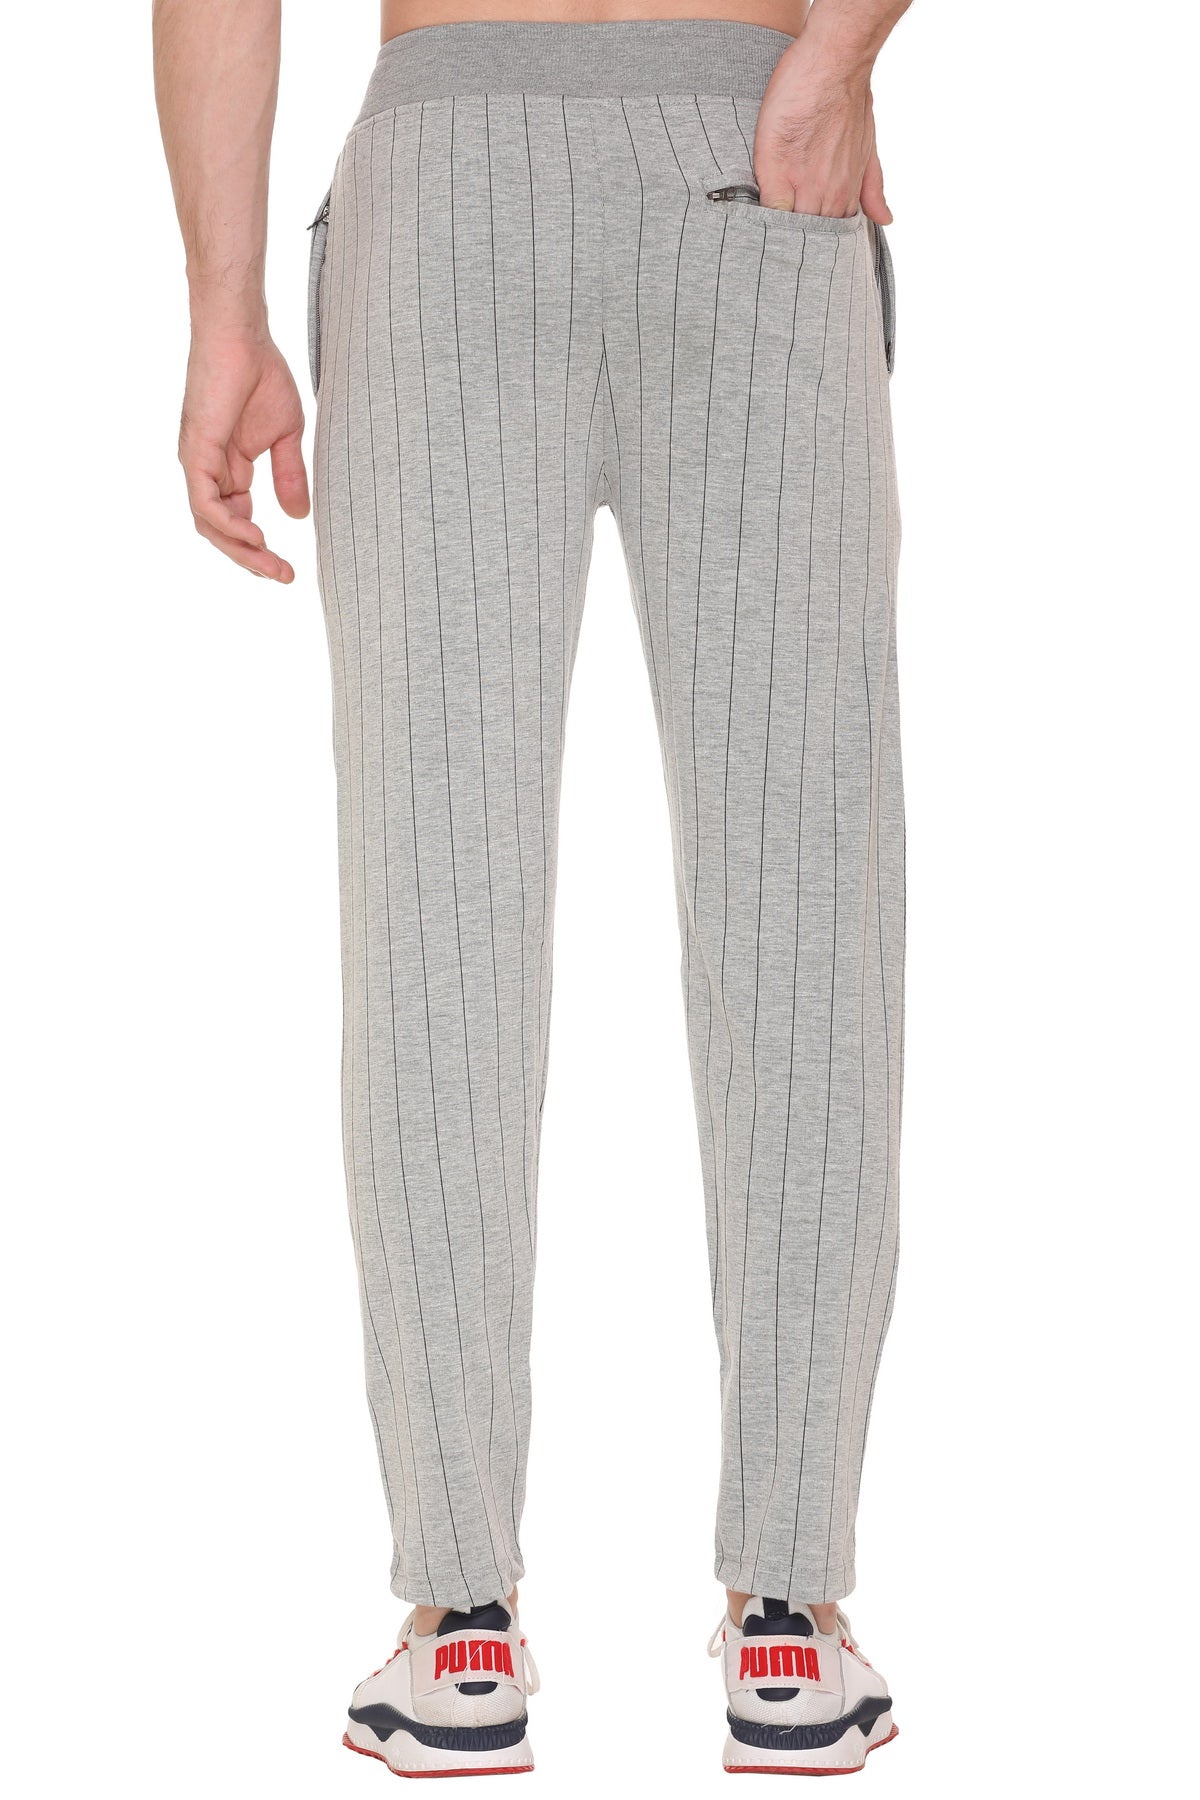 Stylish Grey Cotton Jinxer Pajama Pants For Men Online in India at best prices